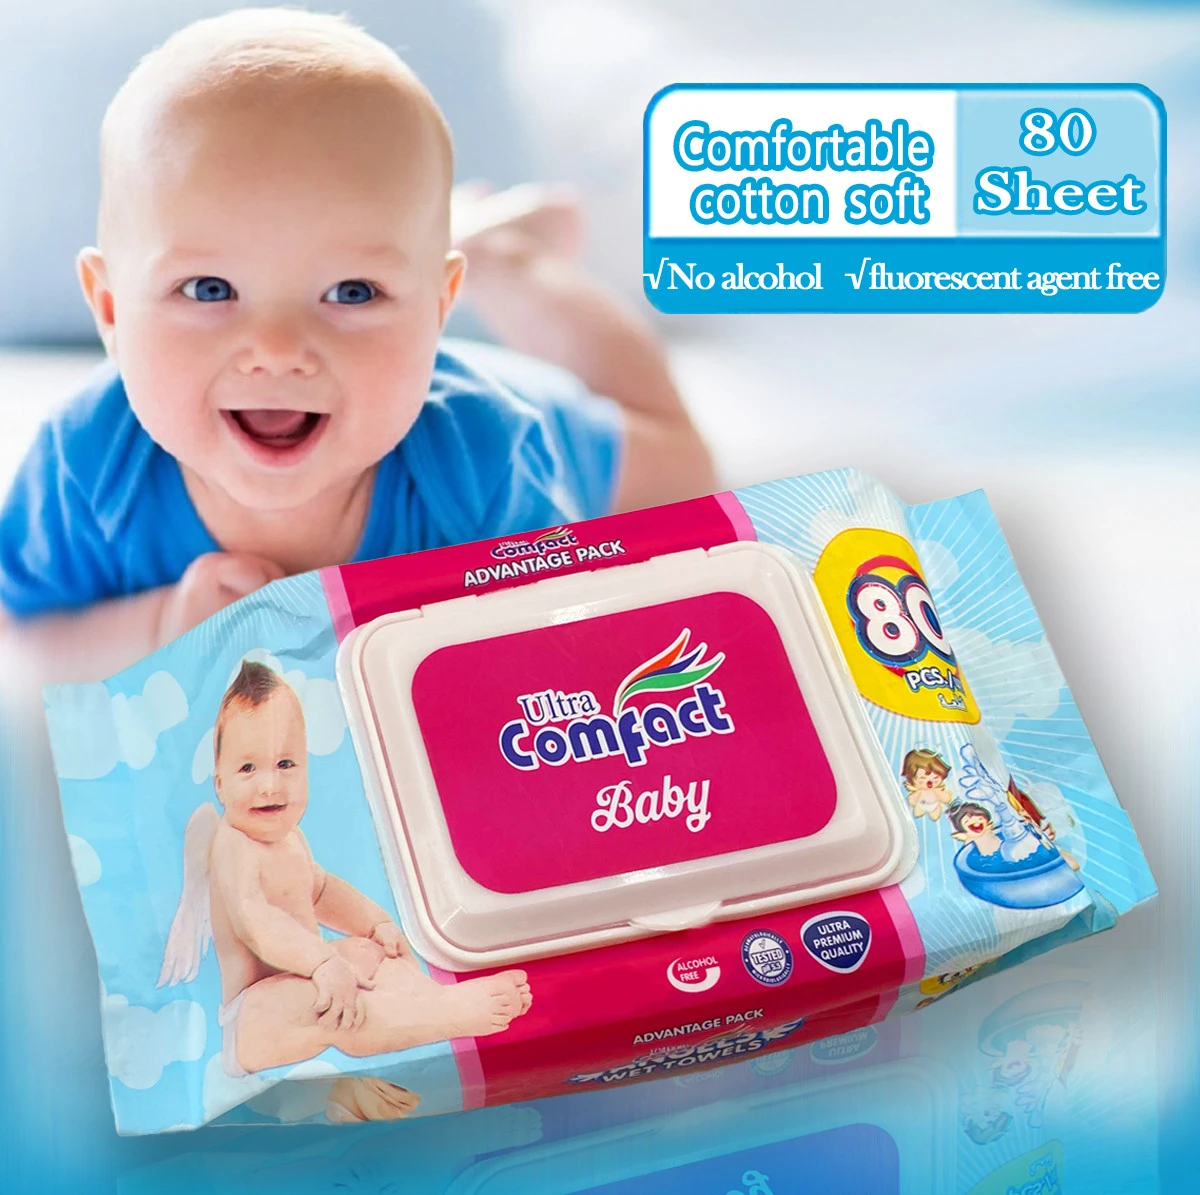 Comfact pure water soft cotton cleansing wipes 80 sheets